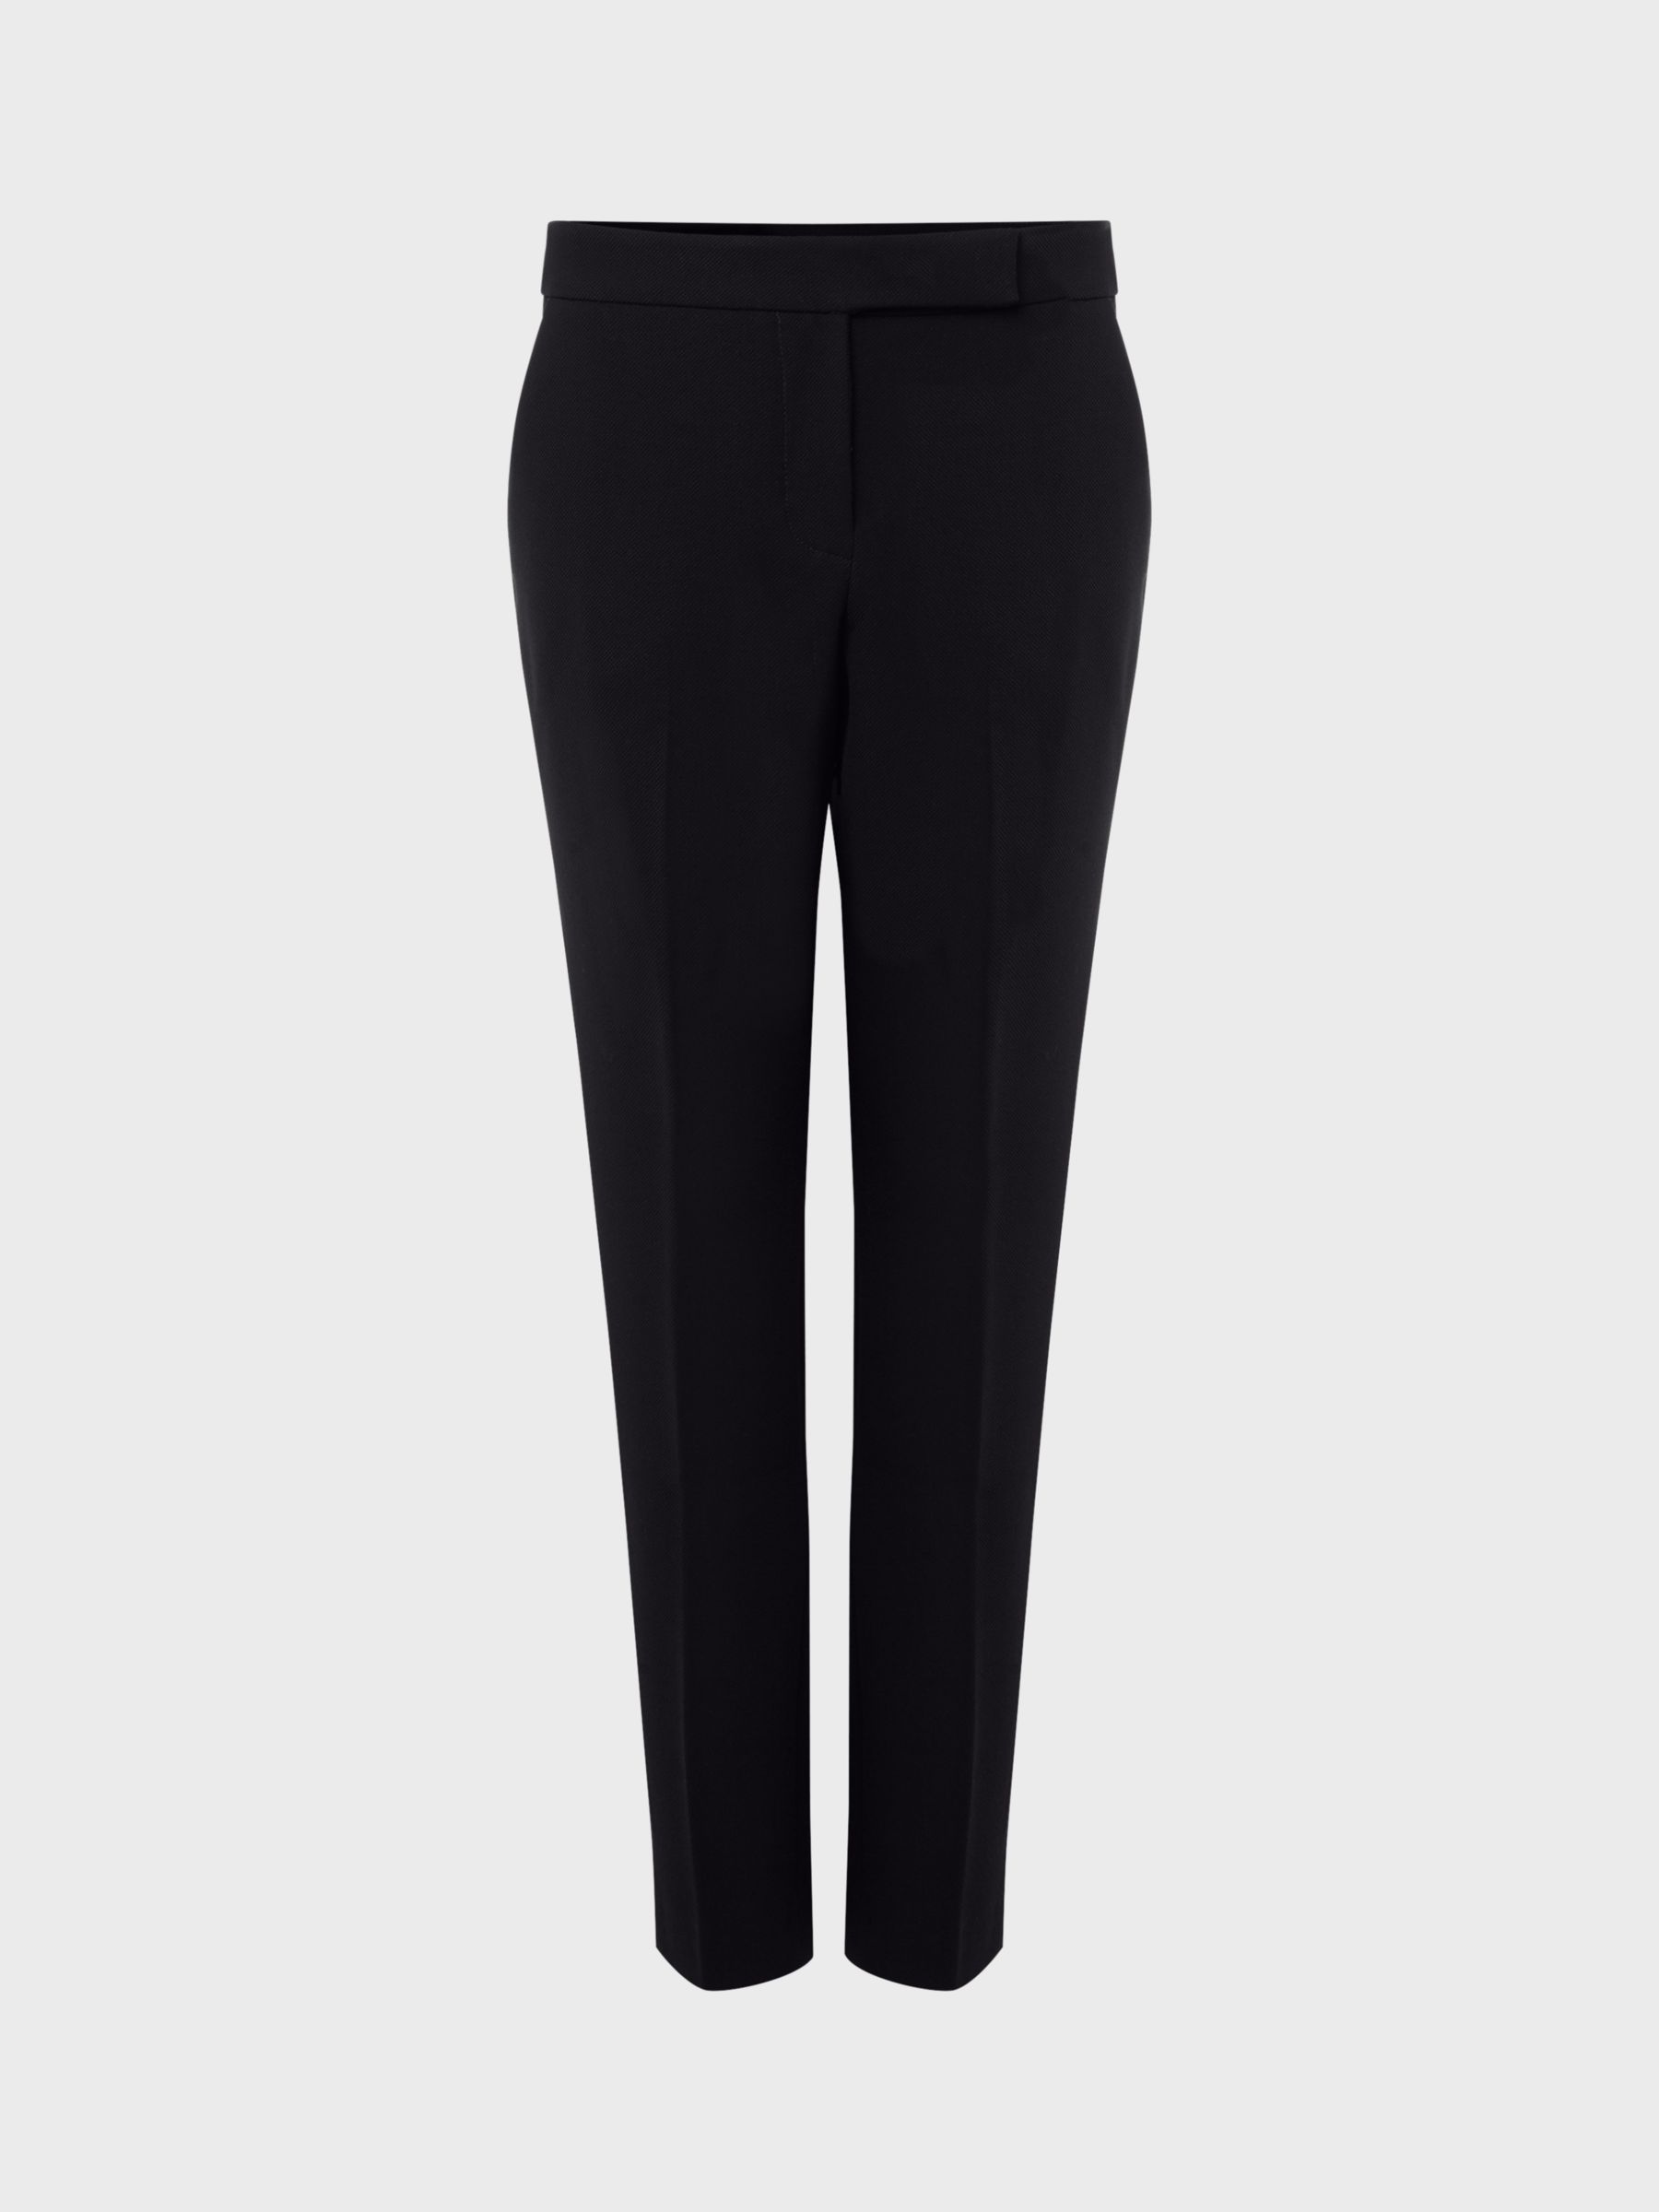 Hobbs Mia Tapered Ankle Grazer Trousers, Navy, 6